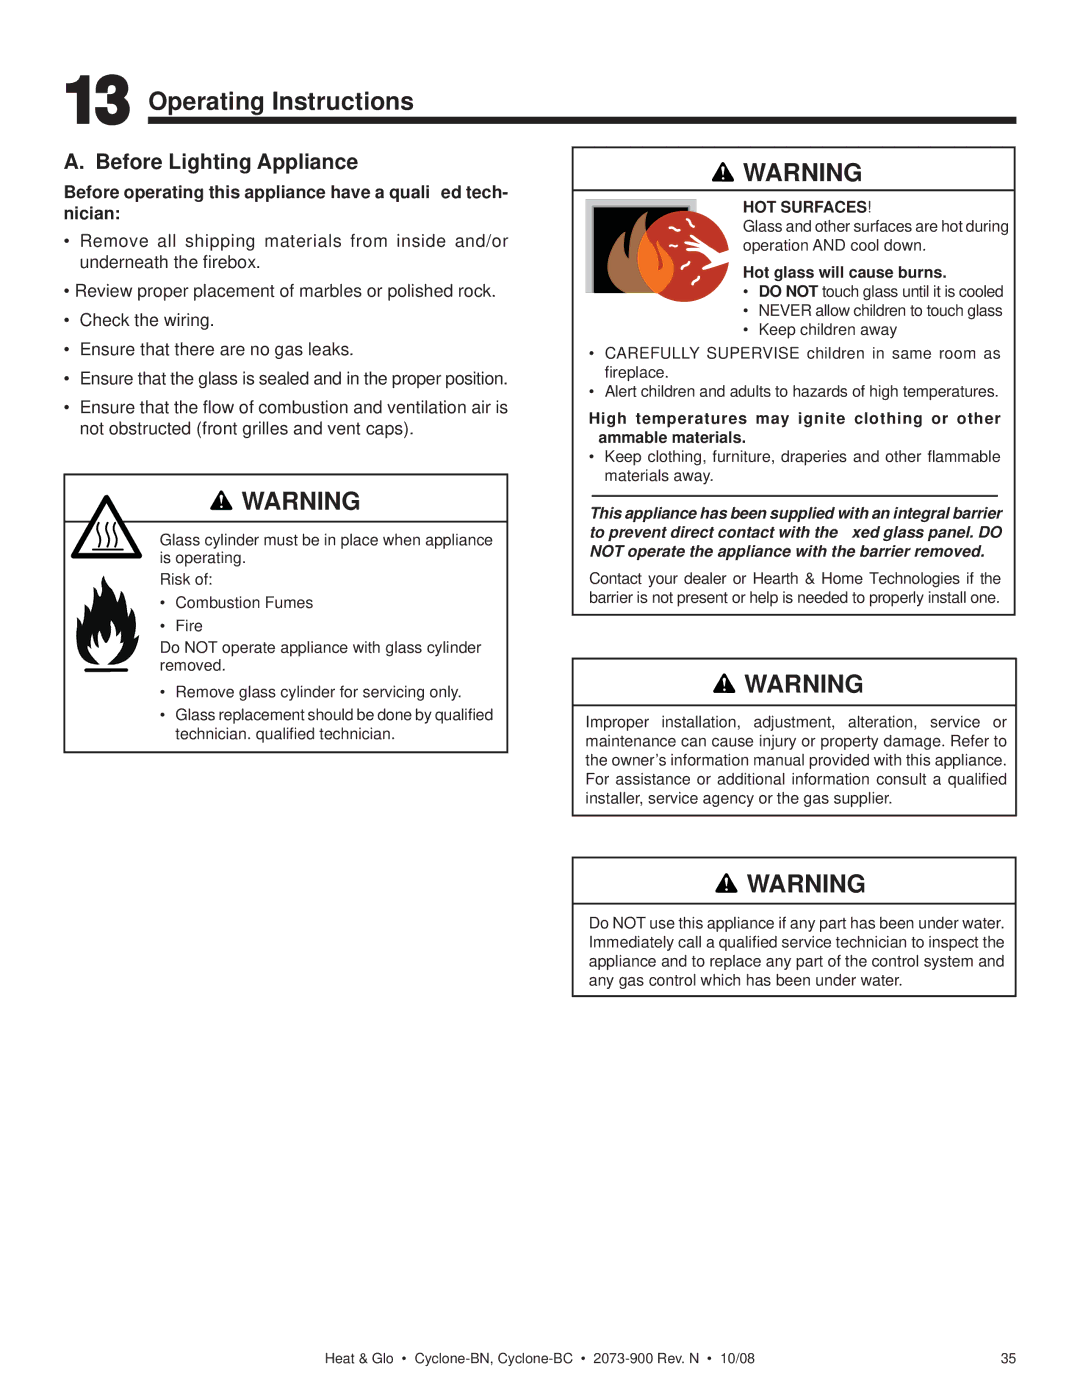 Hearth and Home Technologies Cyclone-BN, Cyclone-BC owner manual Operating Instructions, Before Lighting Appliance 